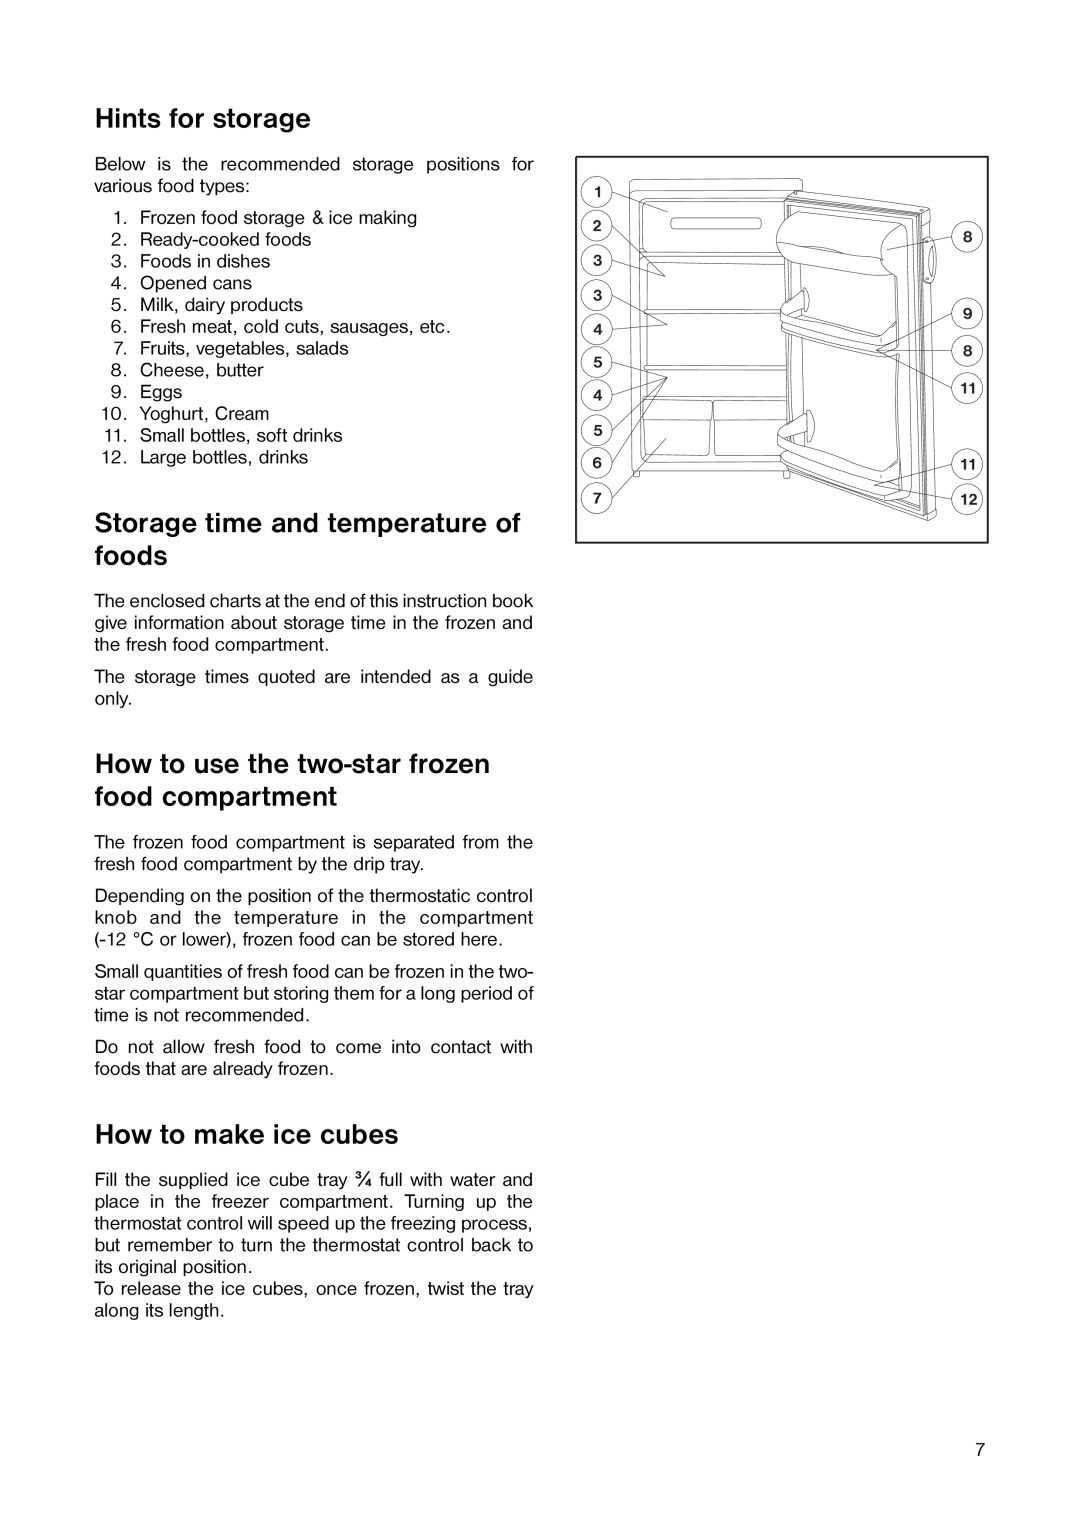 Kelvinator ER 1642 T manual Hints for storage, Storage time and temperature of foods, How to make ice cubes 